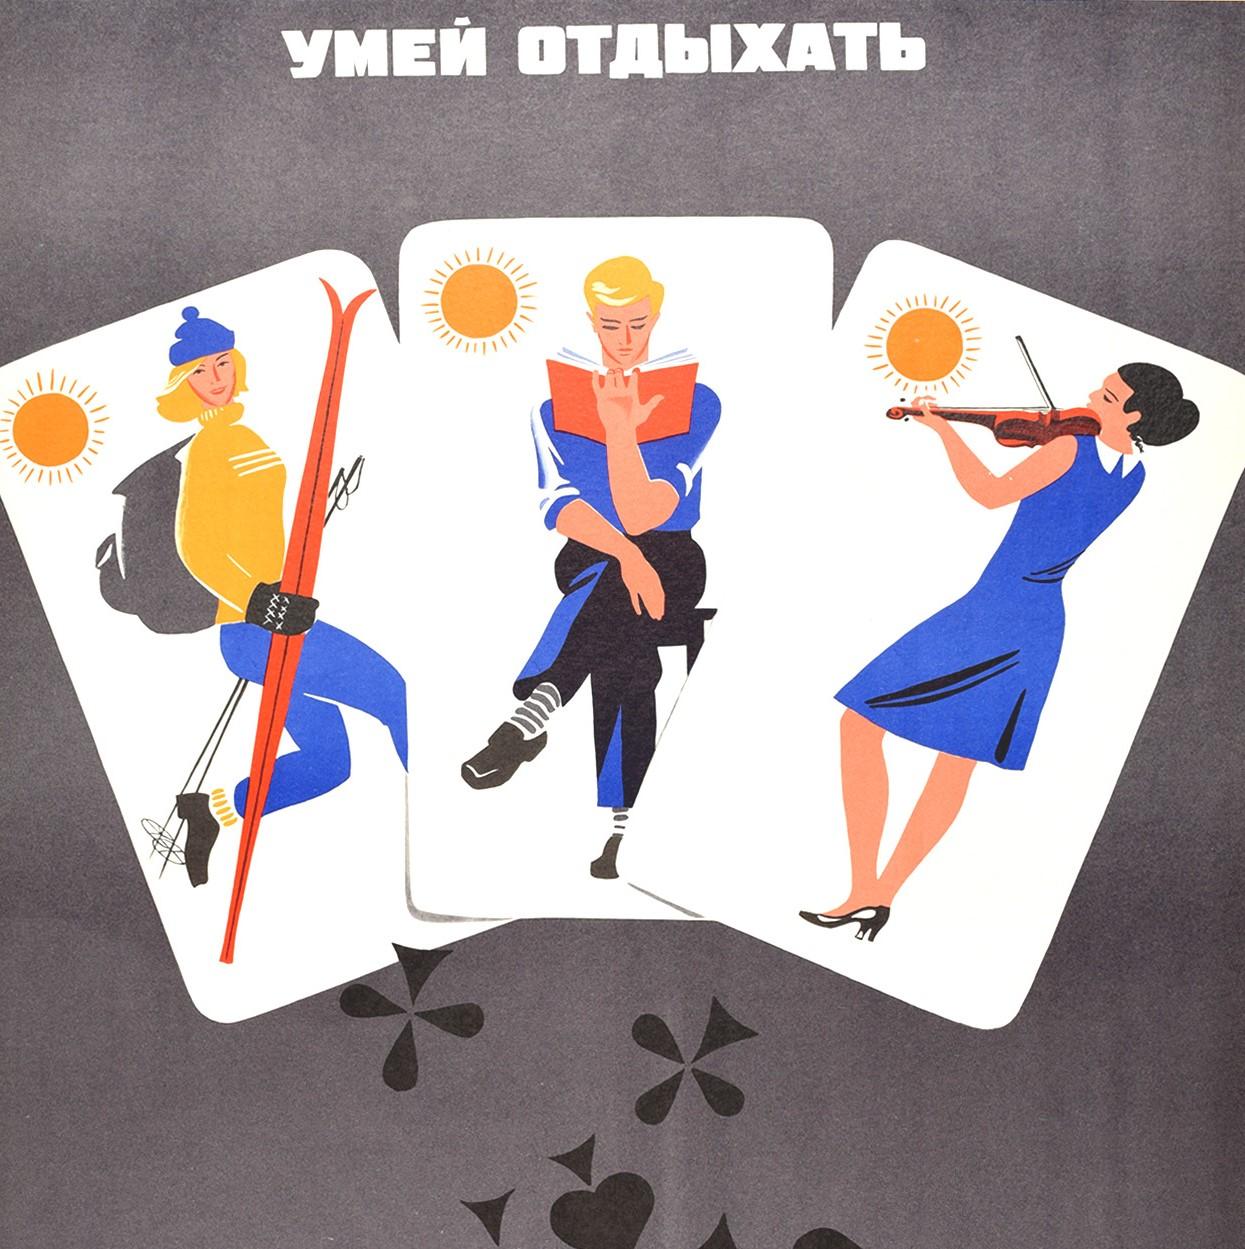 Original vintage Soviet propaganda poster - Know How to Rest / Relax - featuring a great design showing the suits from a pack of cards falling with the King holding a drinking glass and a bottle marked 40' and the Queen holding a glass of wine